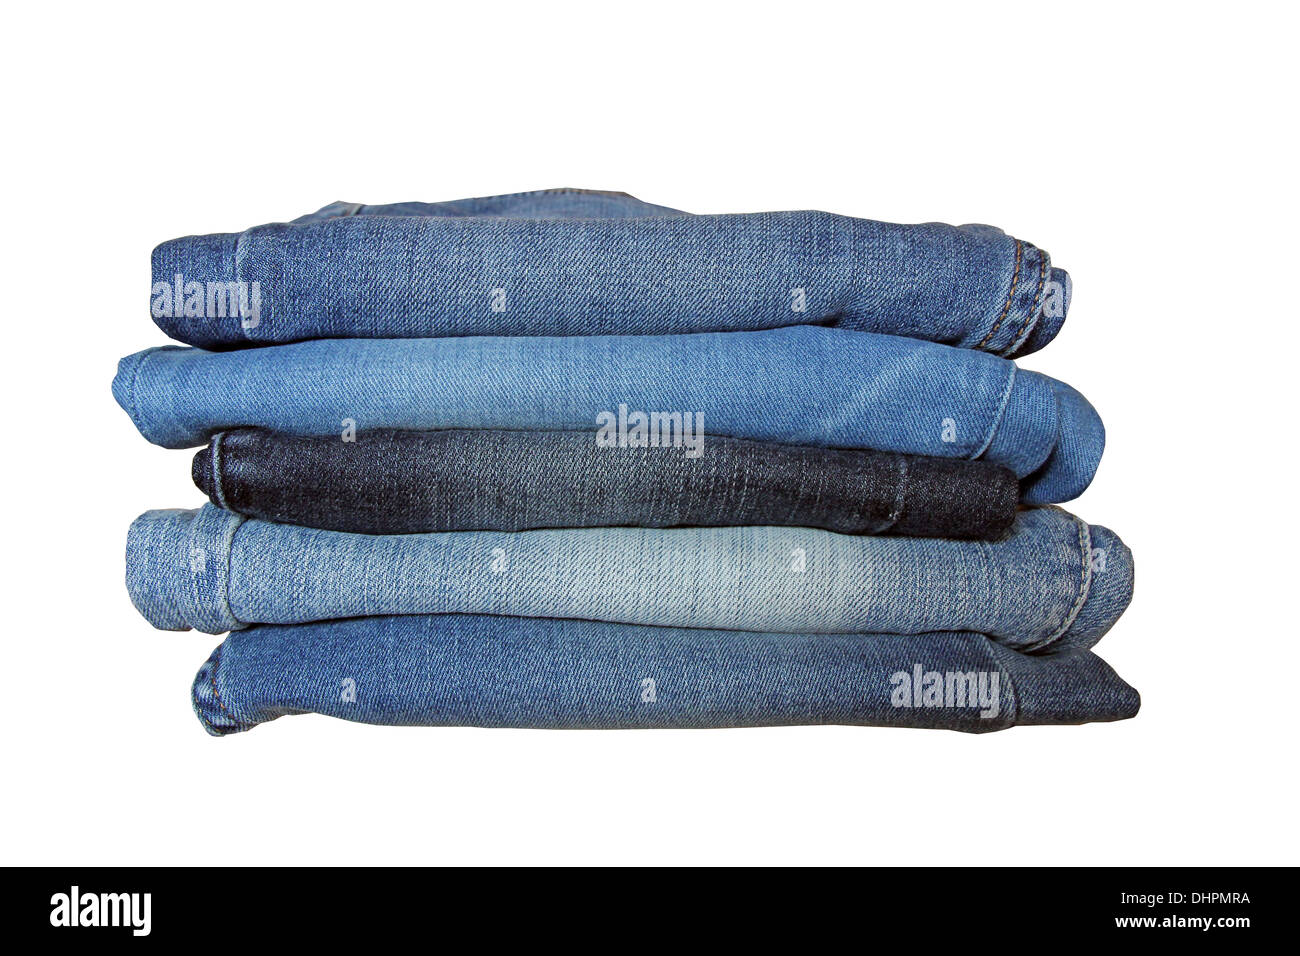 Stack of blue jeans of different shade over white background. Stock Photo